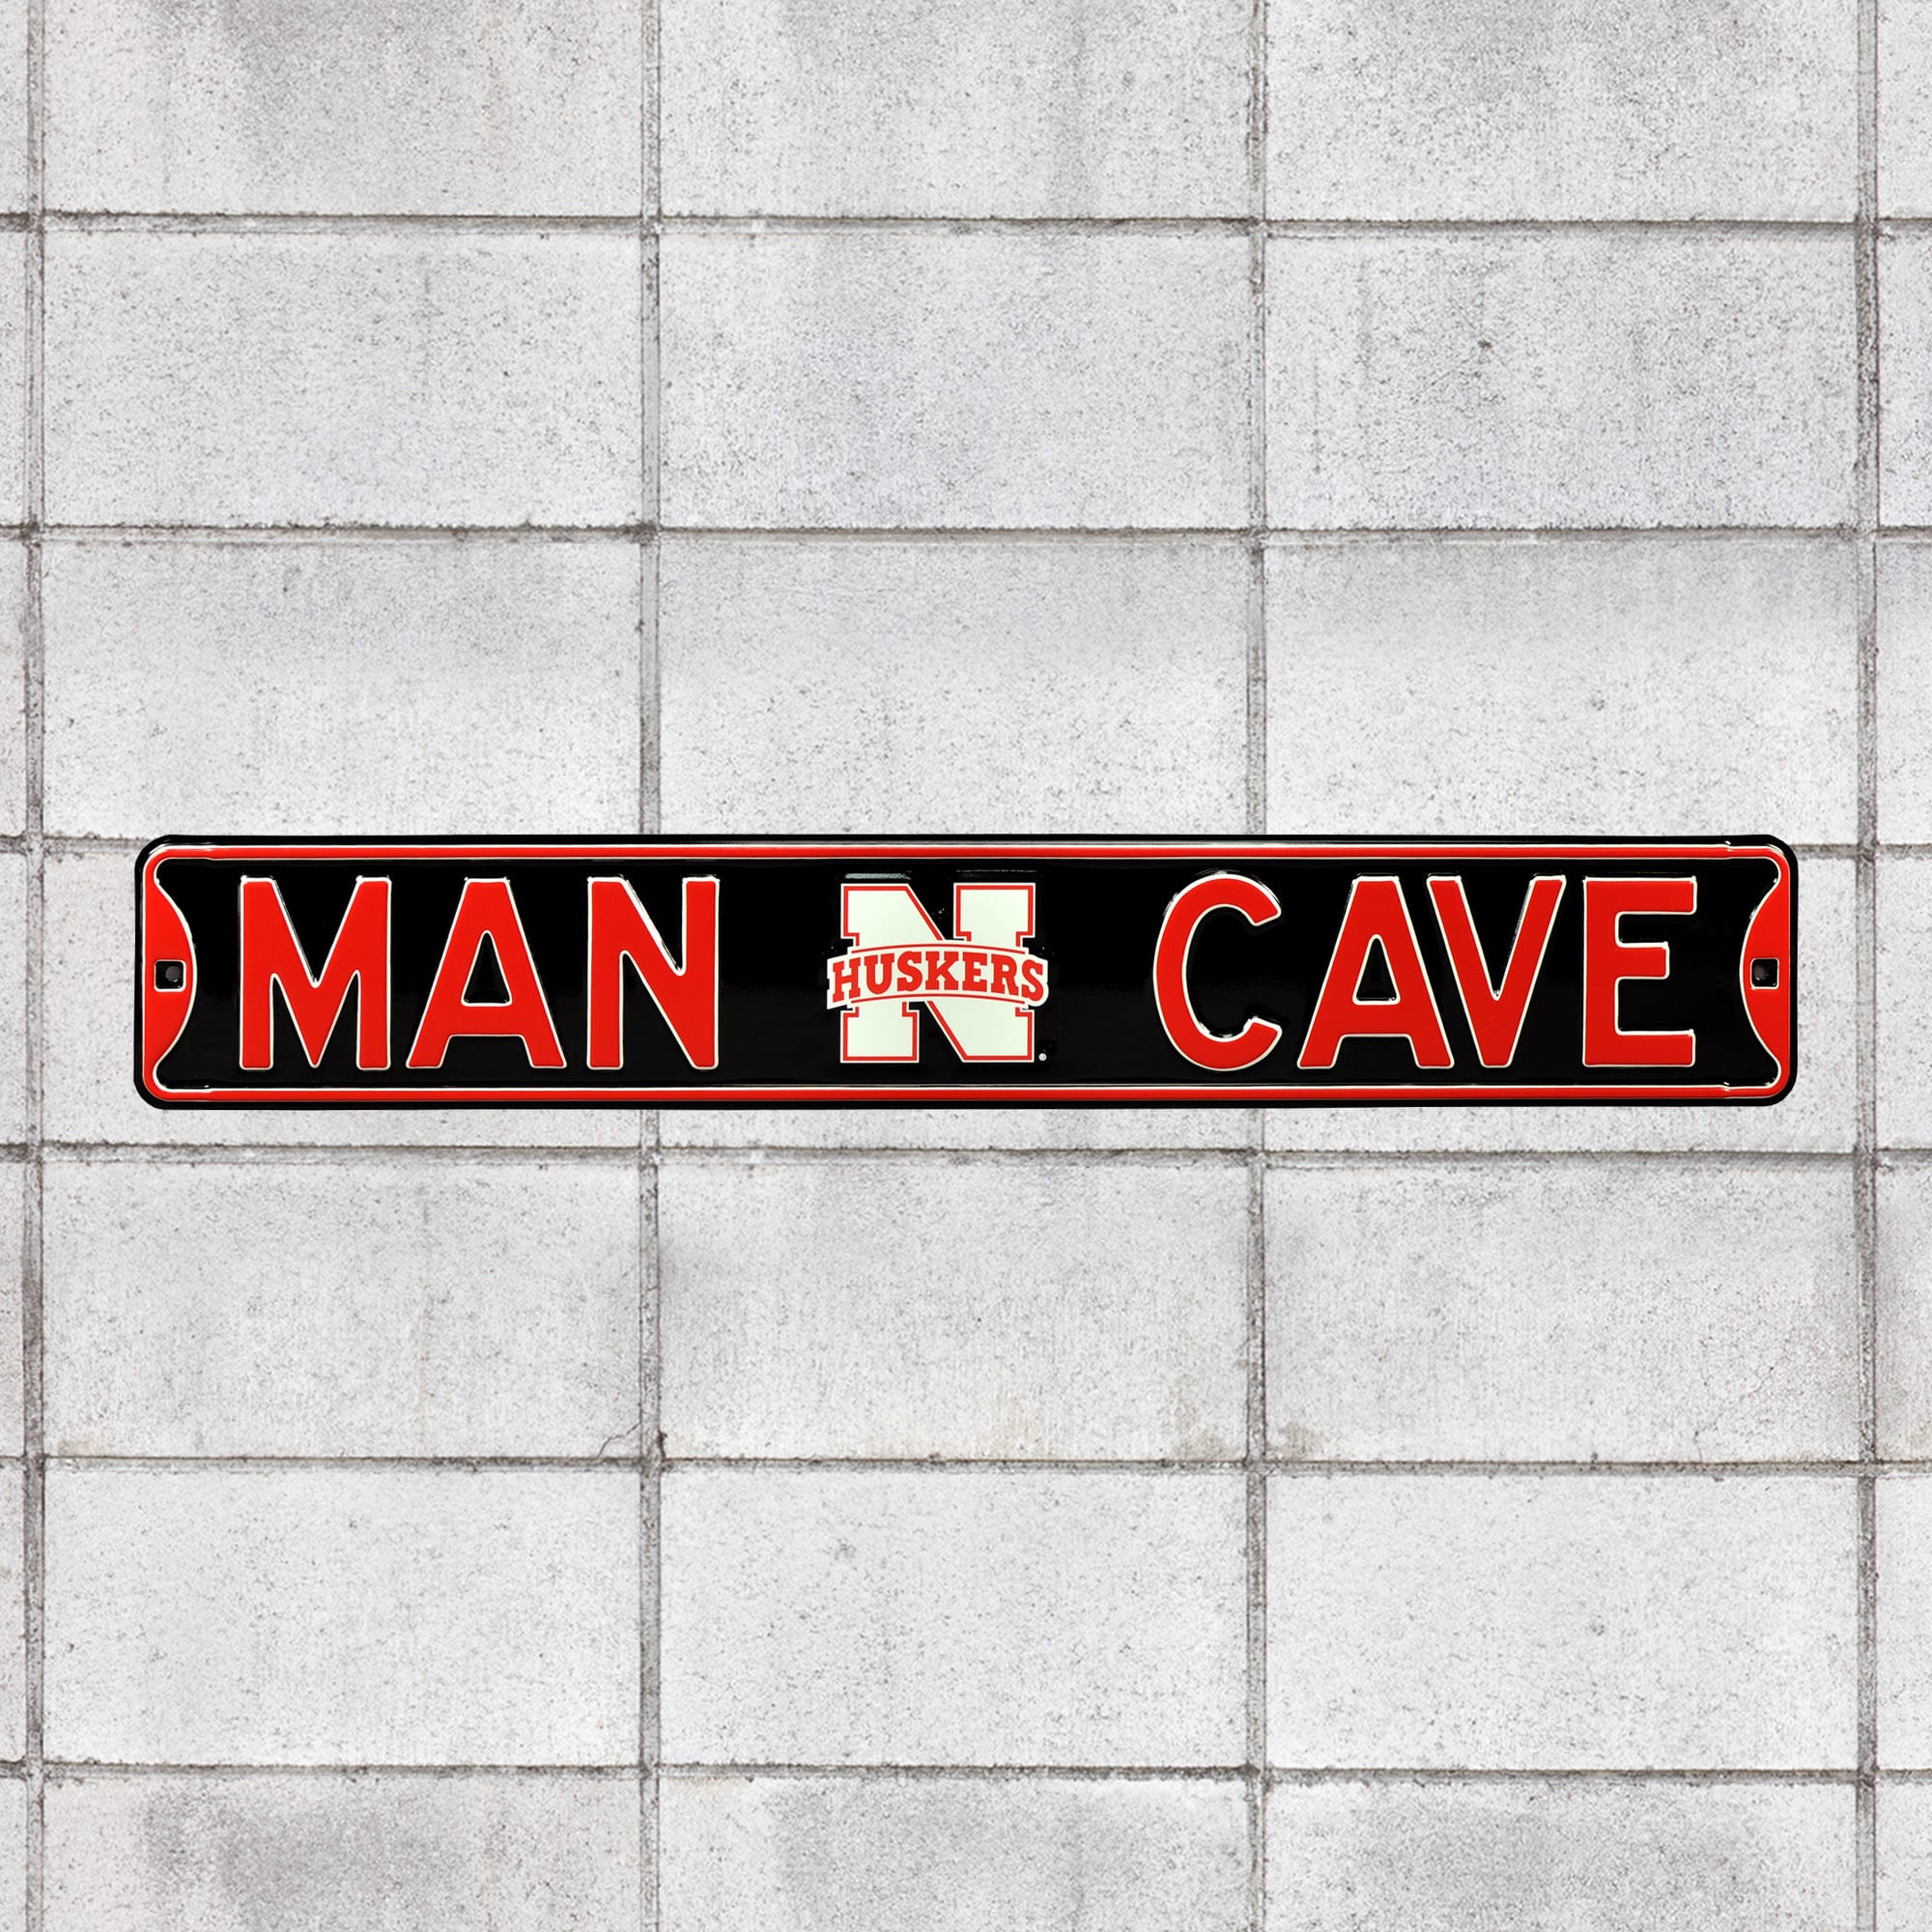 Nebraska Cornhuskers: Man Cave - Officially Licensed Metal Street Sign 36.0"W x 6.0"H by Fathead | 100% Steel